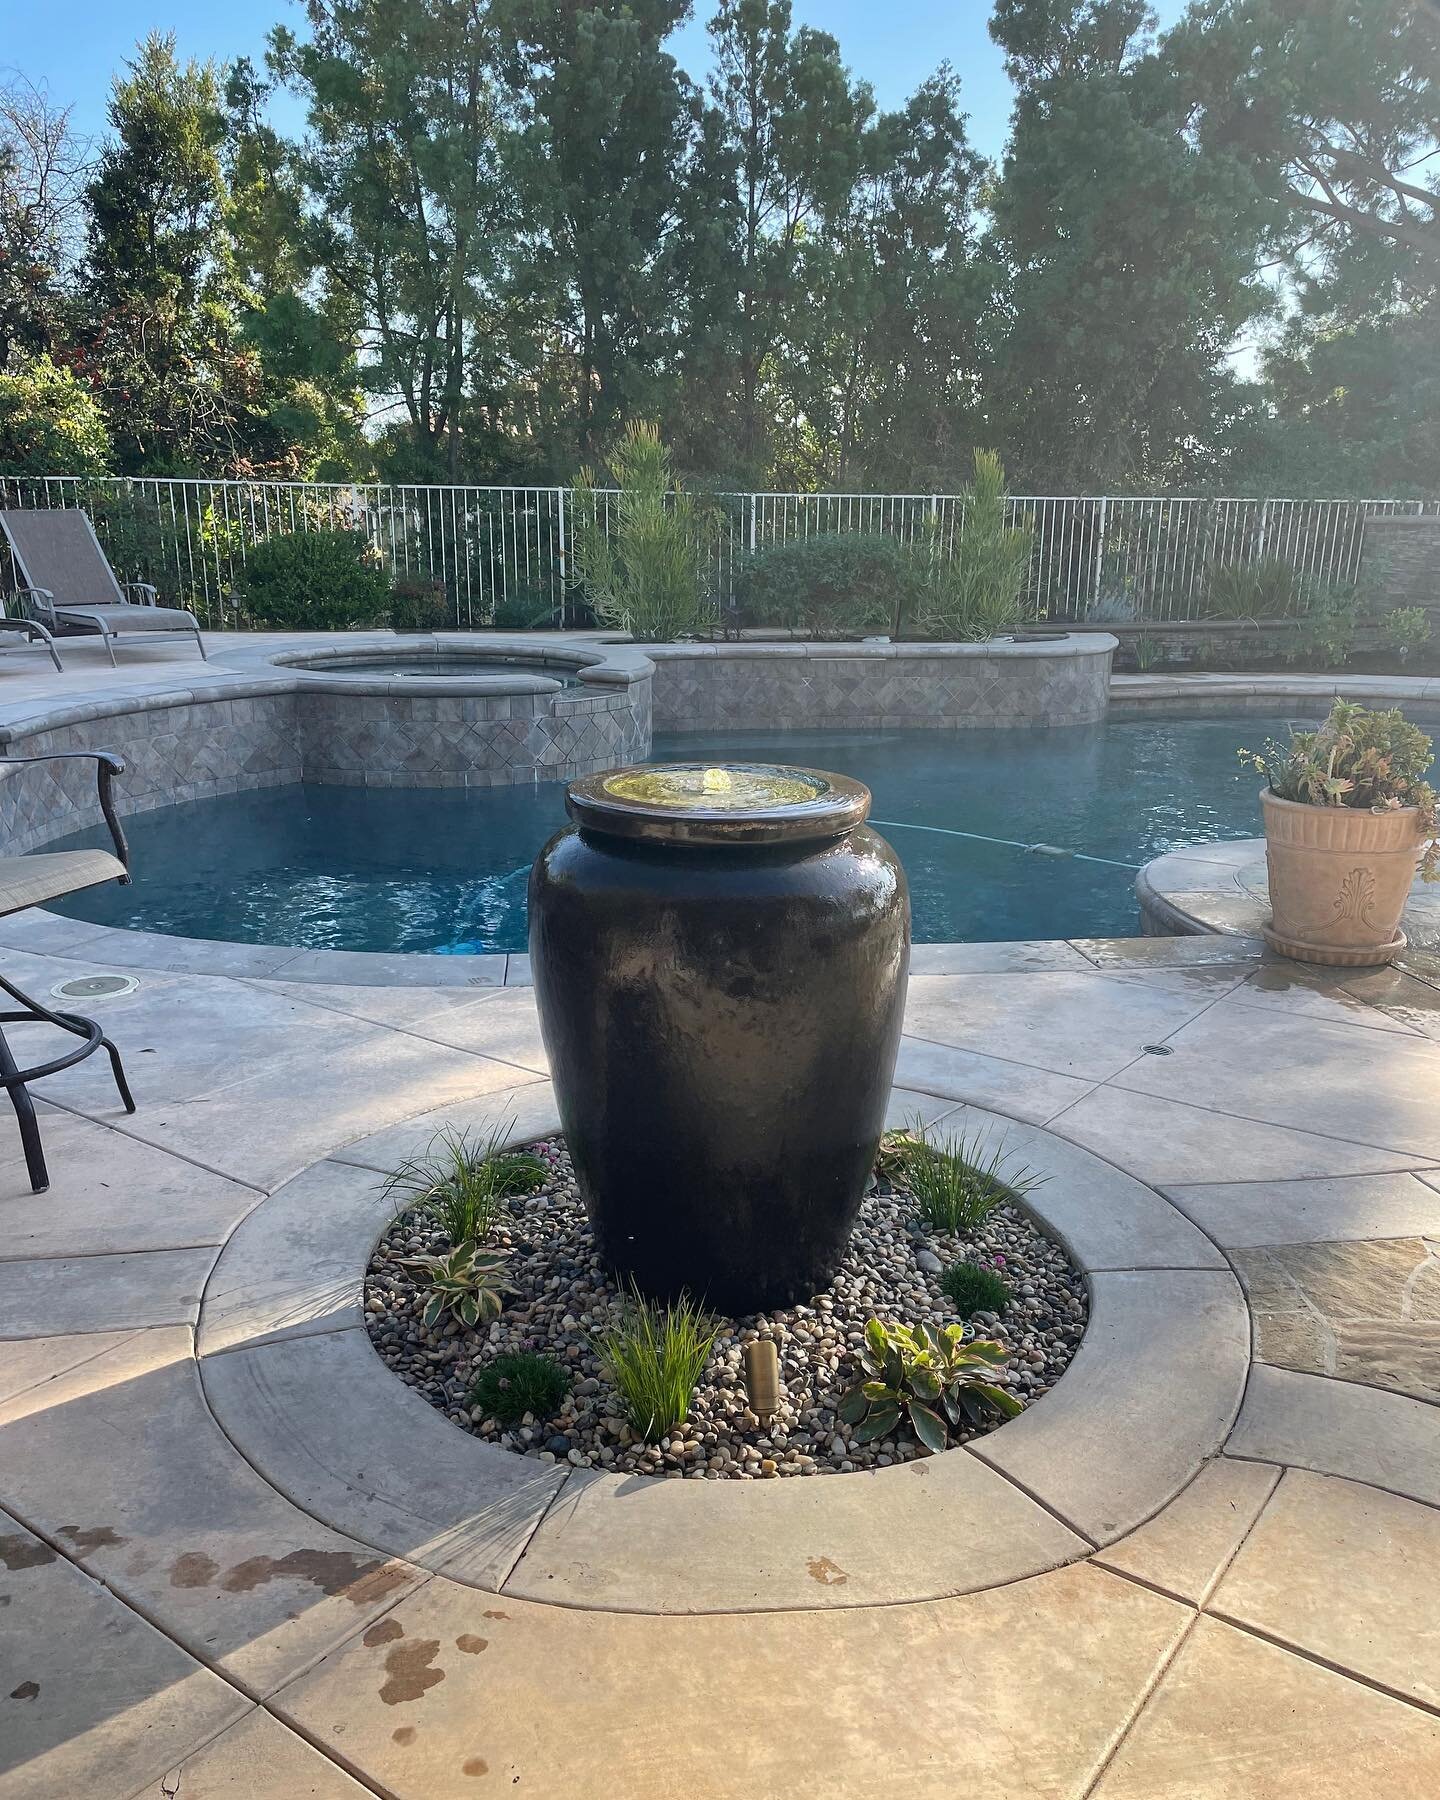 Disappearing pots are the perfect option to go with any style of home, they come in different sizes and colors - come see us to get your perfect fit #paradisefountains #waterfeature #fountain #fountains #garden #orangcounty #inlandempire #socal #potf